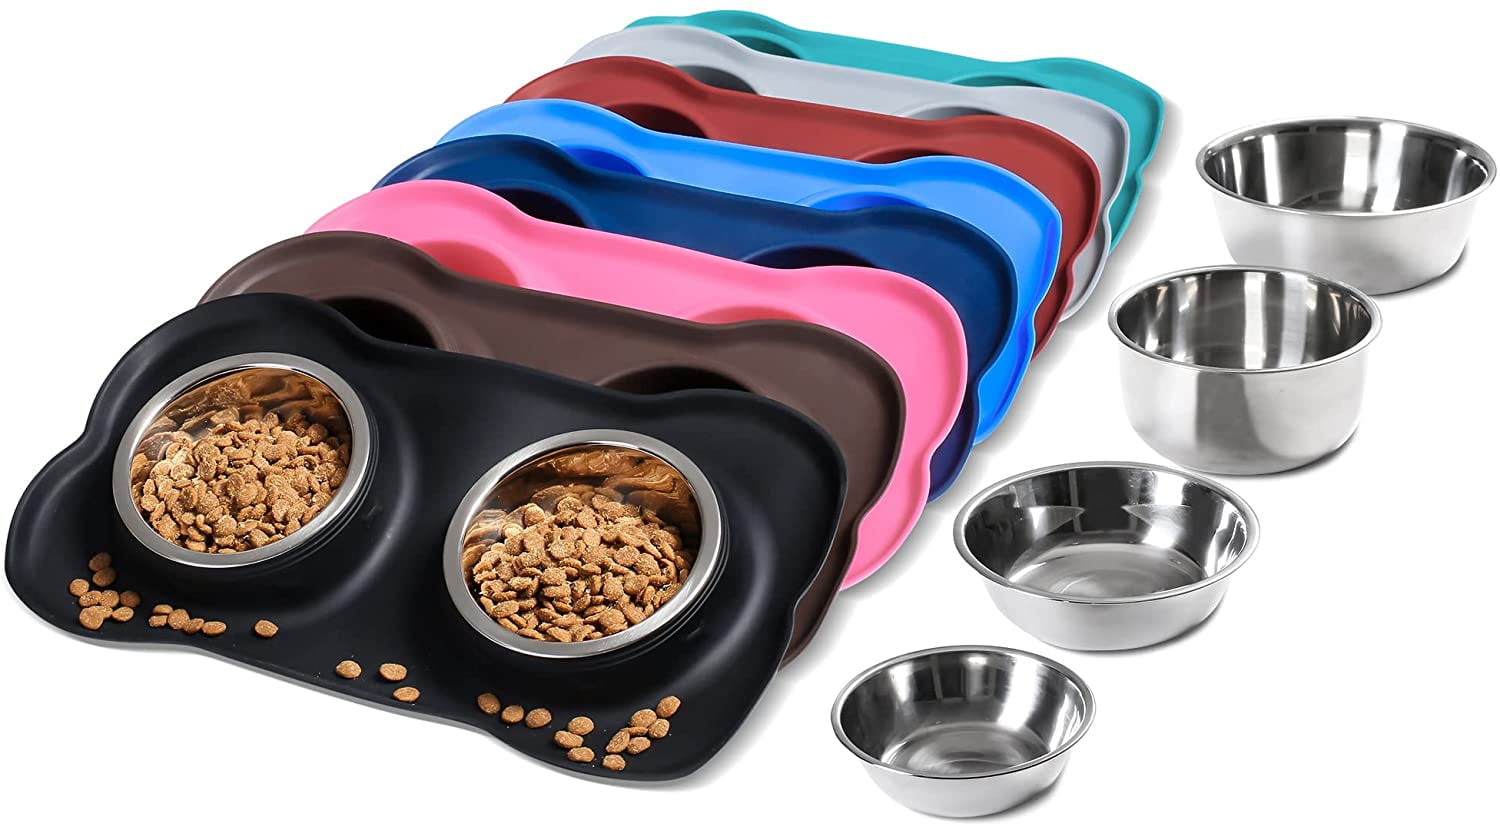 Dog Bowls & Mat Set - Stainless Steel Bowls Set in a No Mess, No Spill, Non  Skid, Silicone Mat. Food & Water Bowls for Dogs or Cats - grey